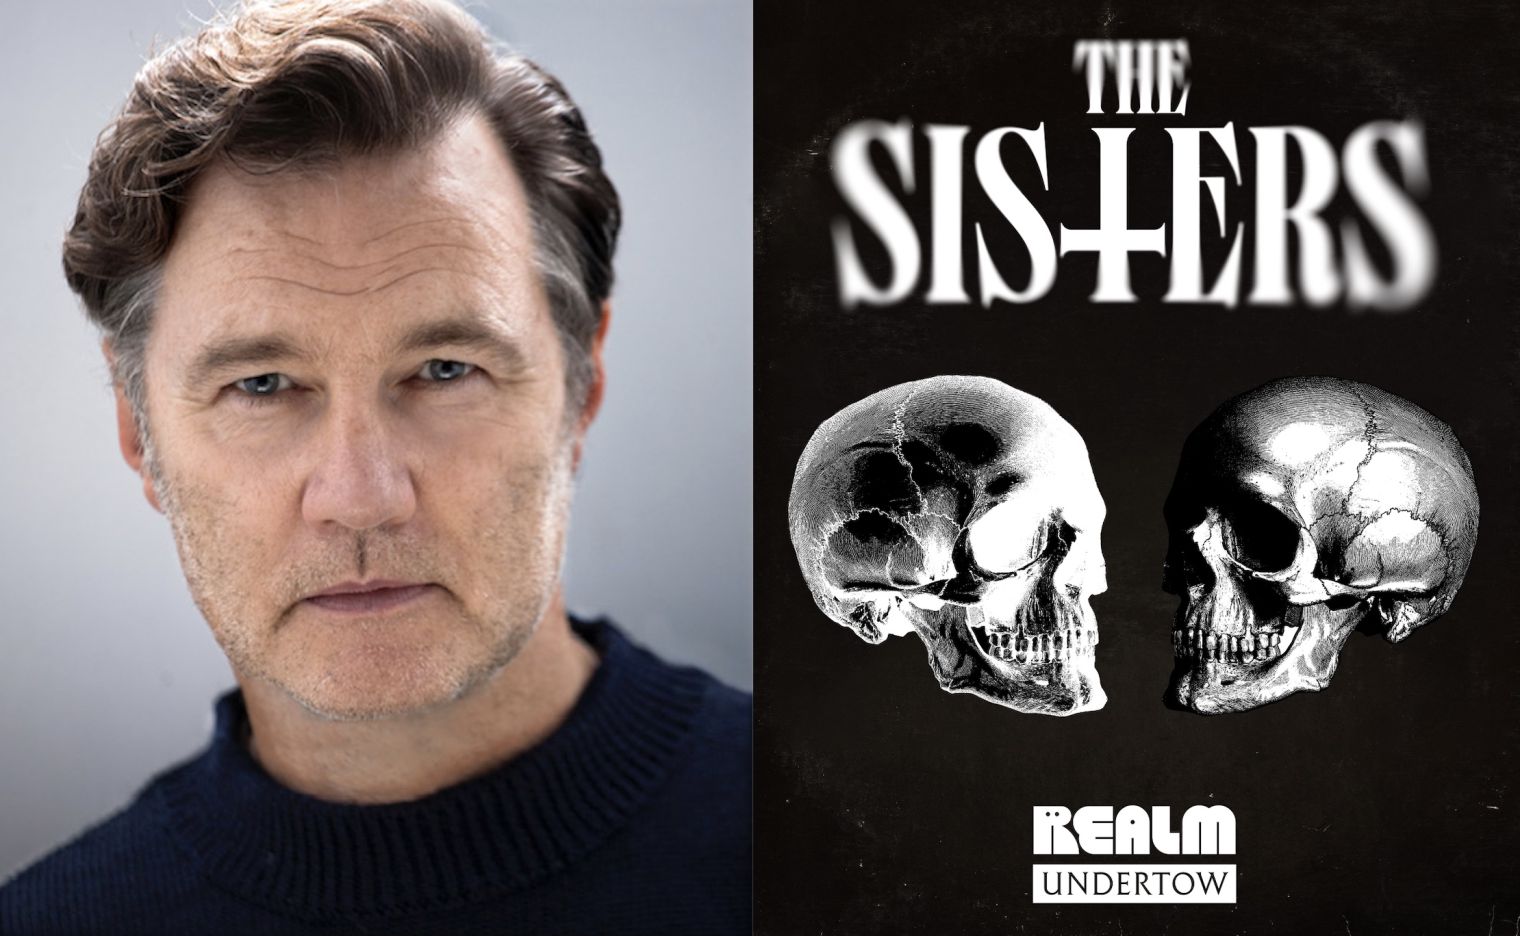 David Morrissey plays Mark in ’The Sisters’ a brand new supernatural horror podcast series